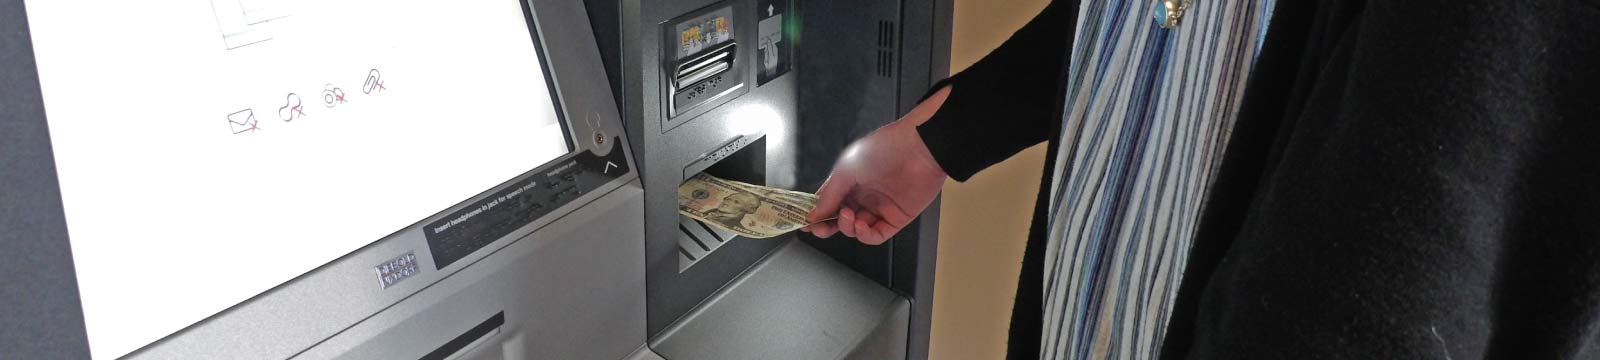 Person Inserting Cash Into an ATM